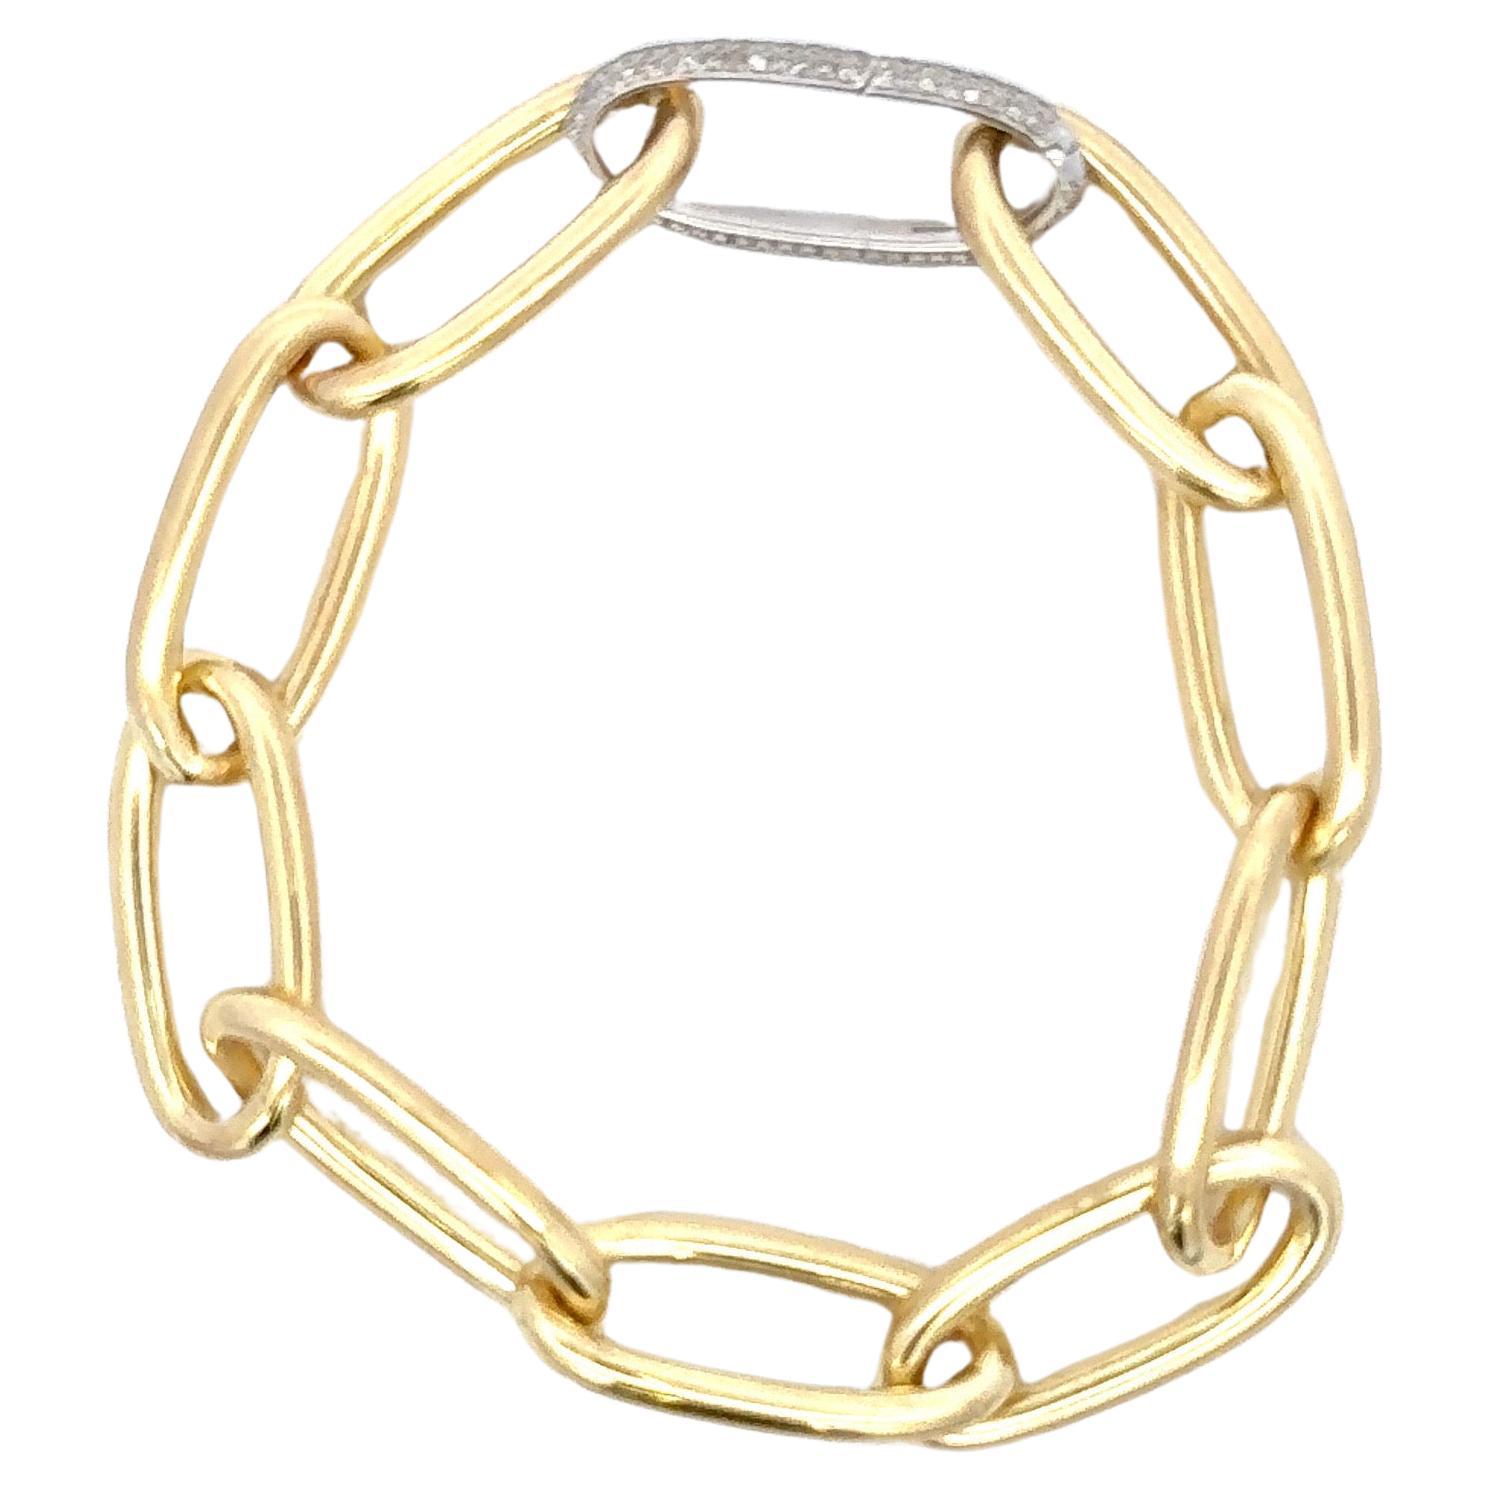 Italian 14 Karat white gold oval paperclip link bracelet with diamond clasp.
Available in 14 karat yellow gold.

Total Weight 9.5 Grams
Diamond Clasp approximately 1 Carat
Available in white & yellow gold
DM for more info